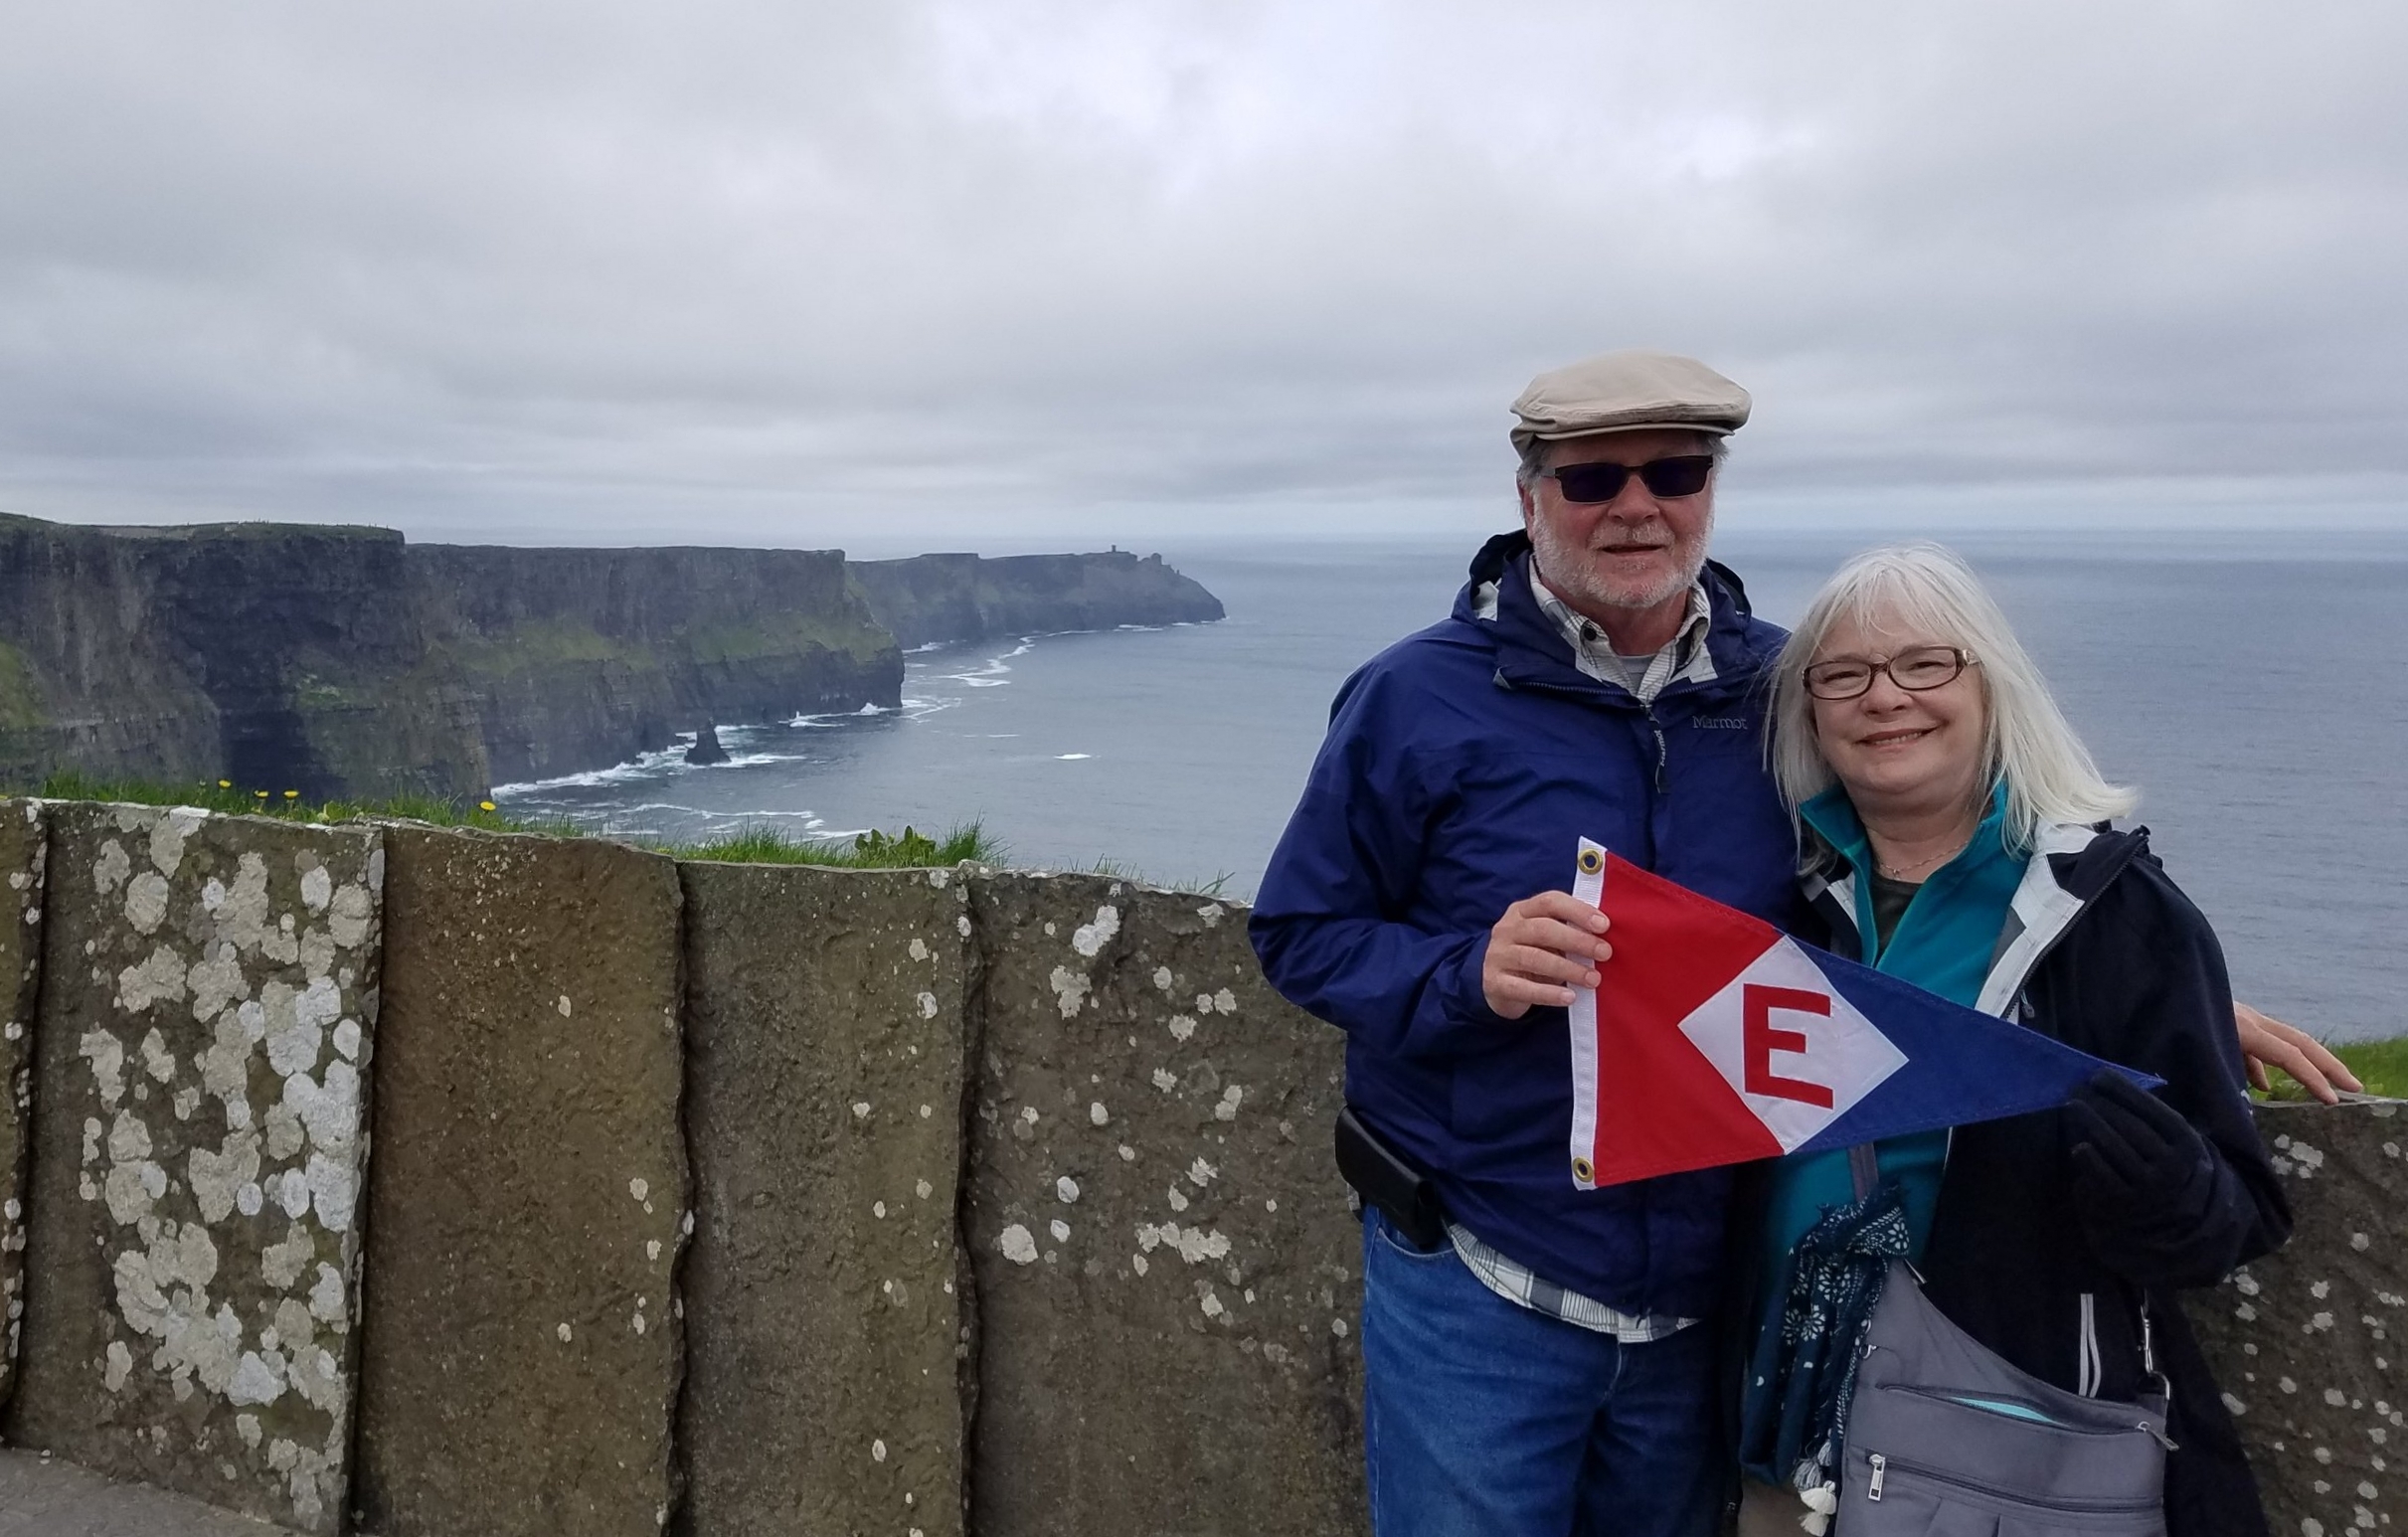  Murray and Linda fly the EYC burgee from the Cliffs of Moher in Ireland. 